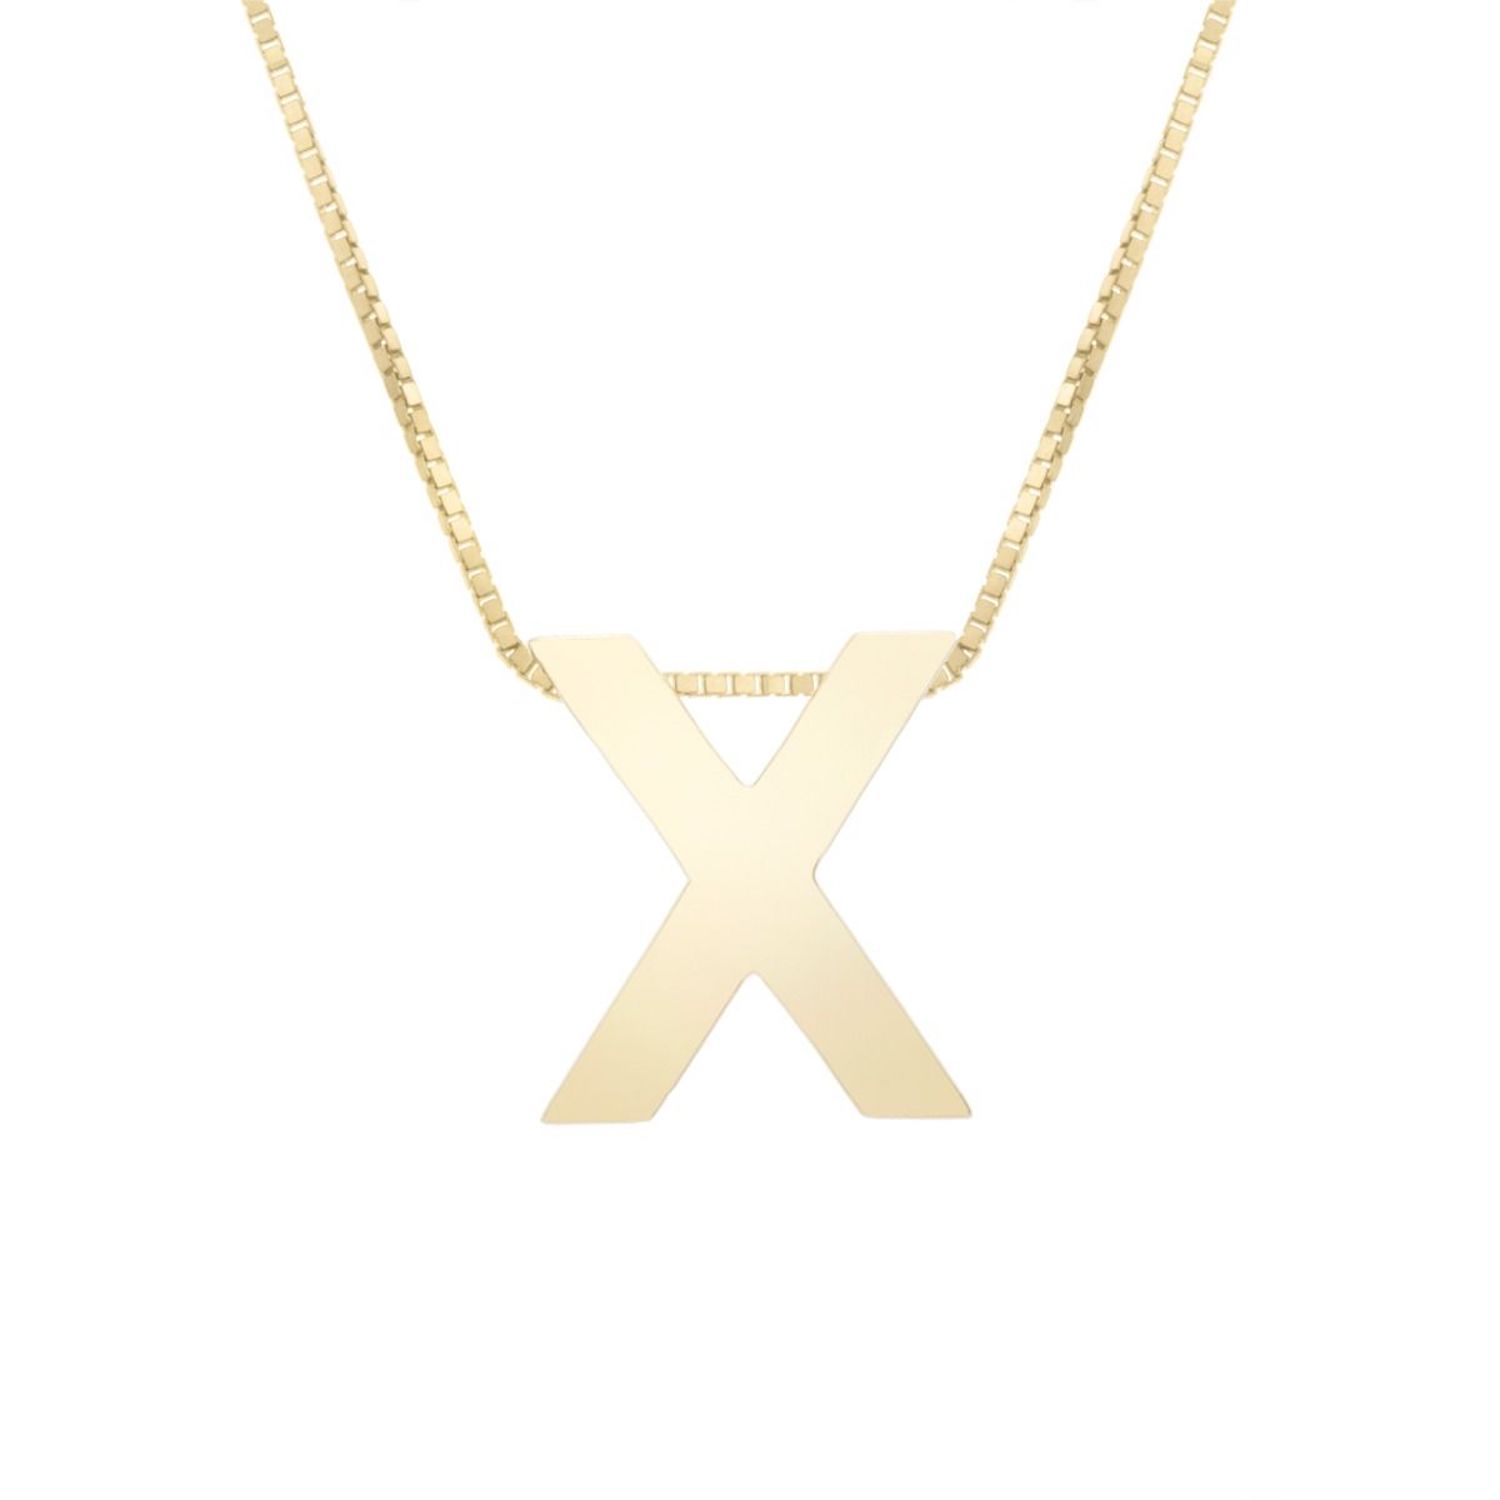 14K Yellow Gold Block Letter Initial Pendant Box Chain Necklace 16"-18" - X